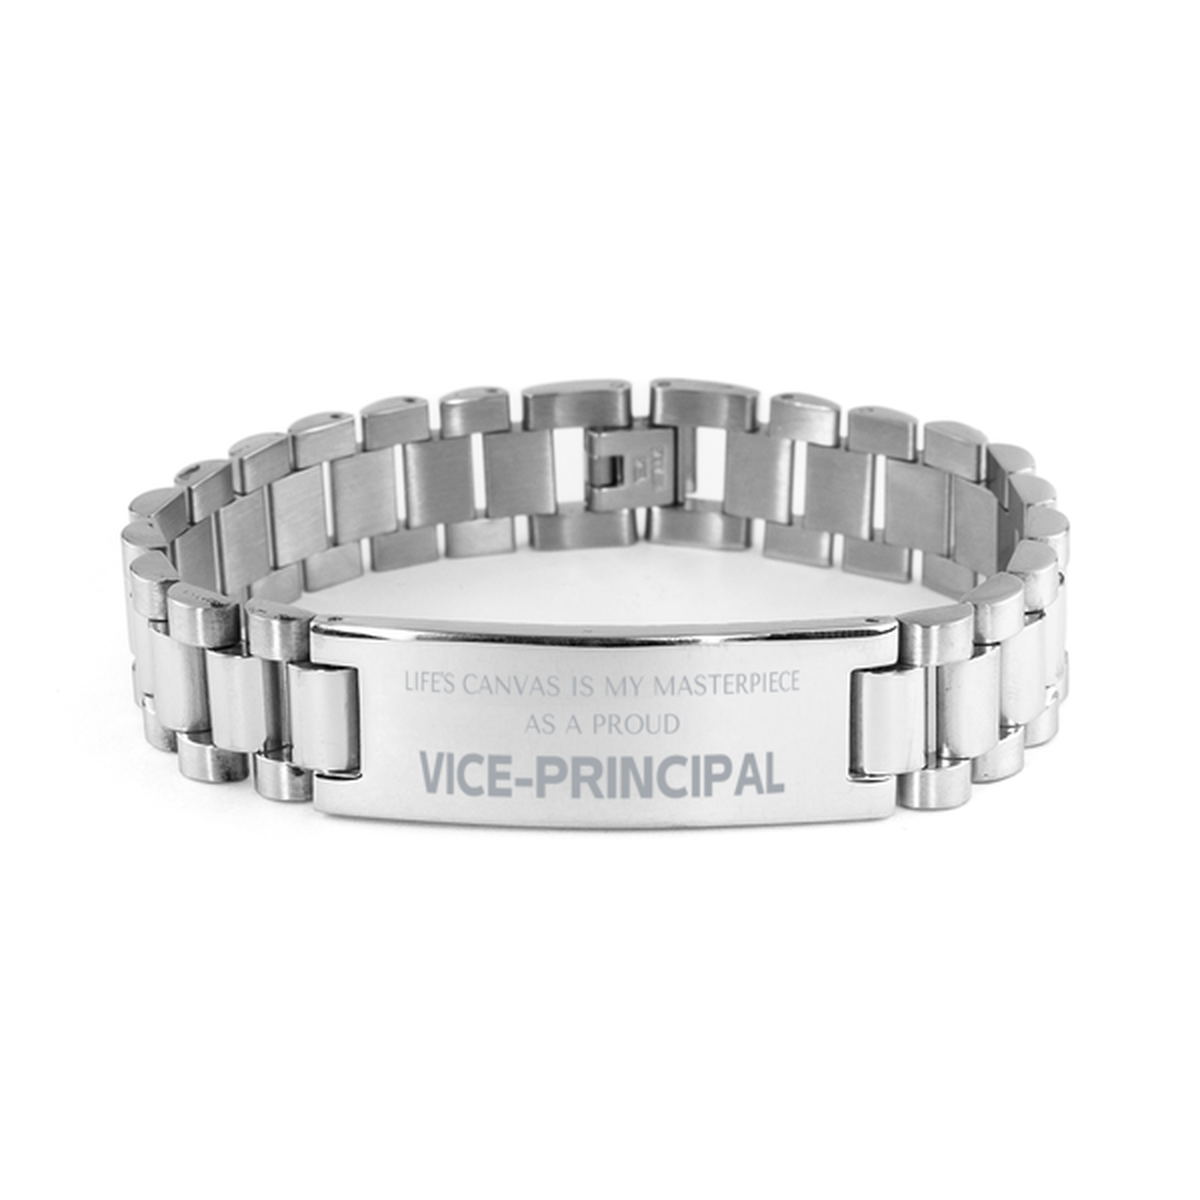 Proud Vice-principal Gifts, Life's canvas is my masterpiece, Epic Birthday Christmas Unique Ladder Stainless Steel Bracelet For Vice-principal, Coworkers, Men, Women, Friends